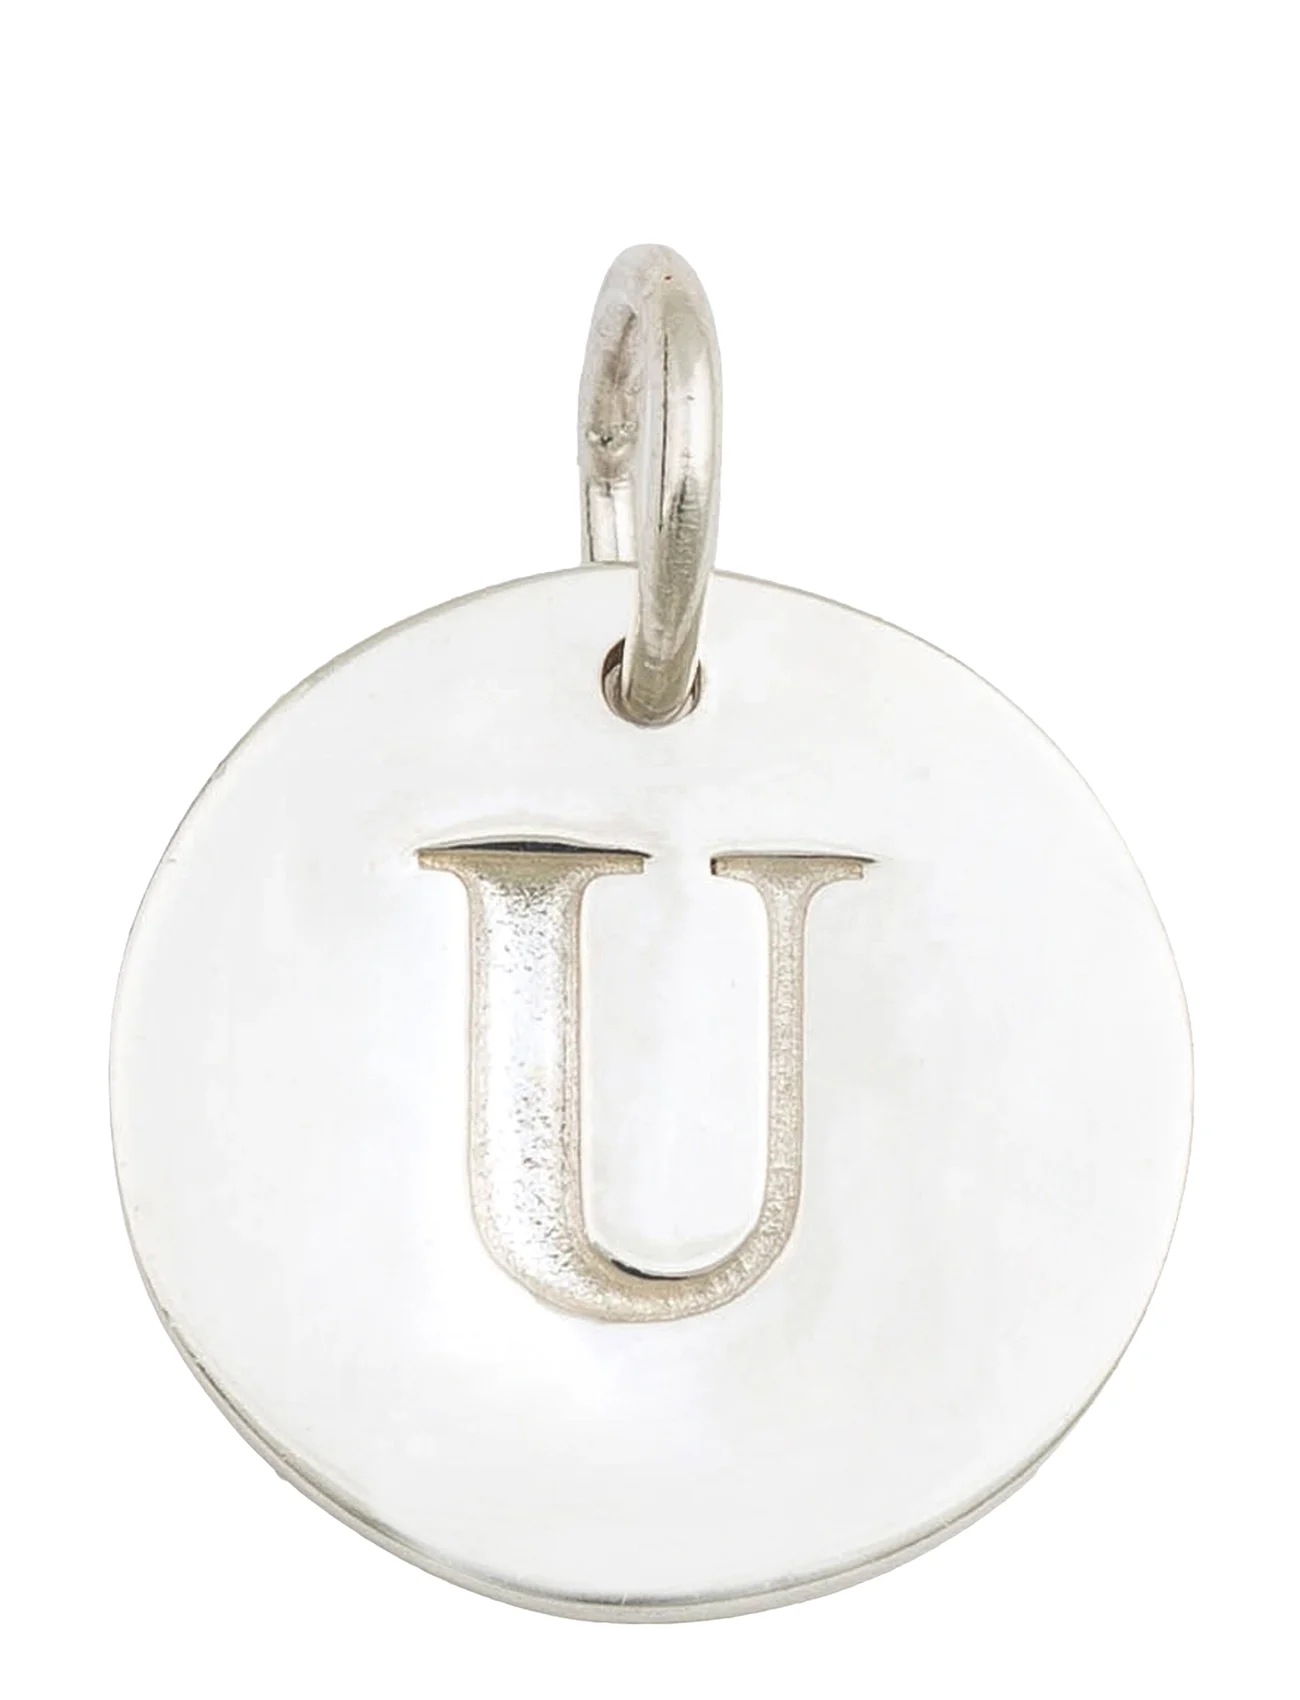 Syster P - Beloved Letter Silver - peoriided outlet-hindadega - silver - 0